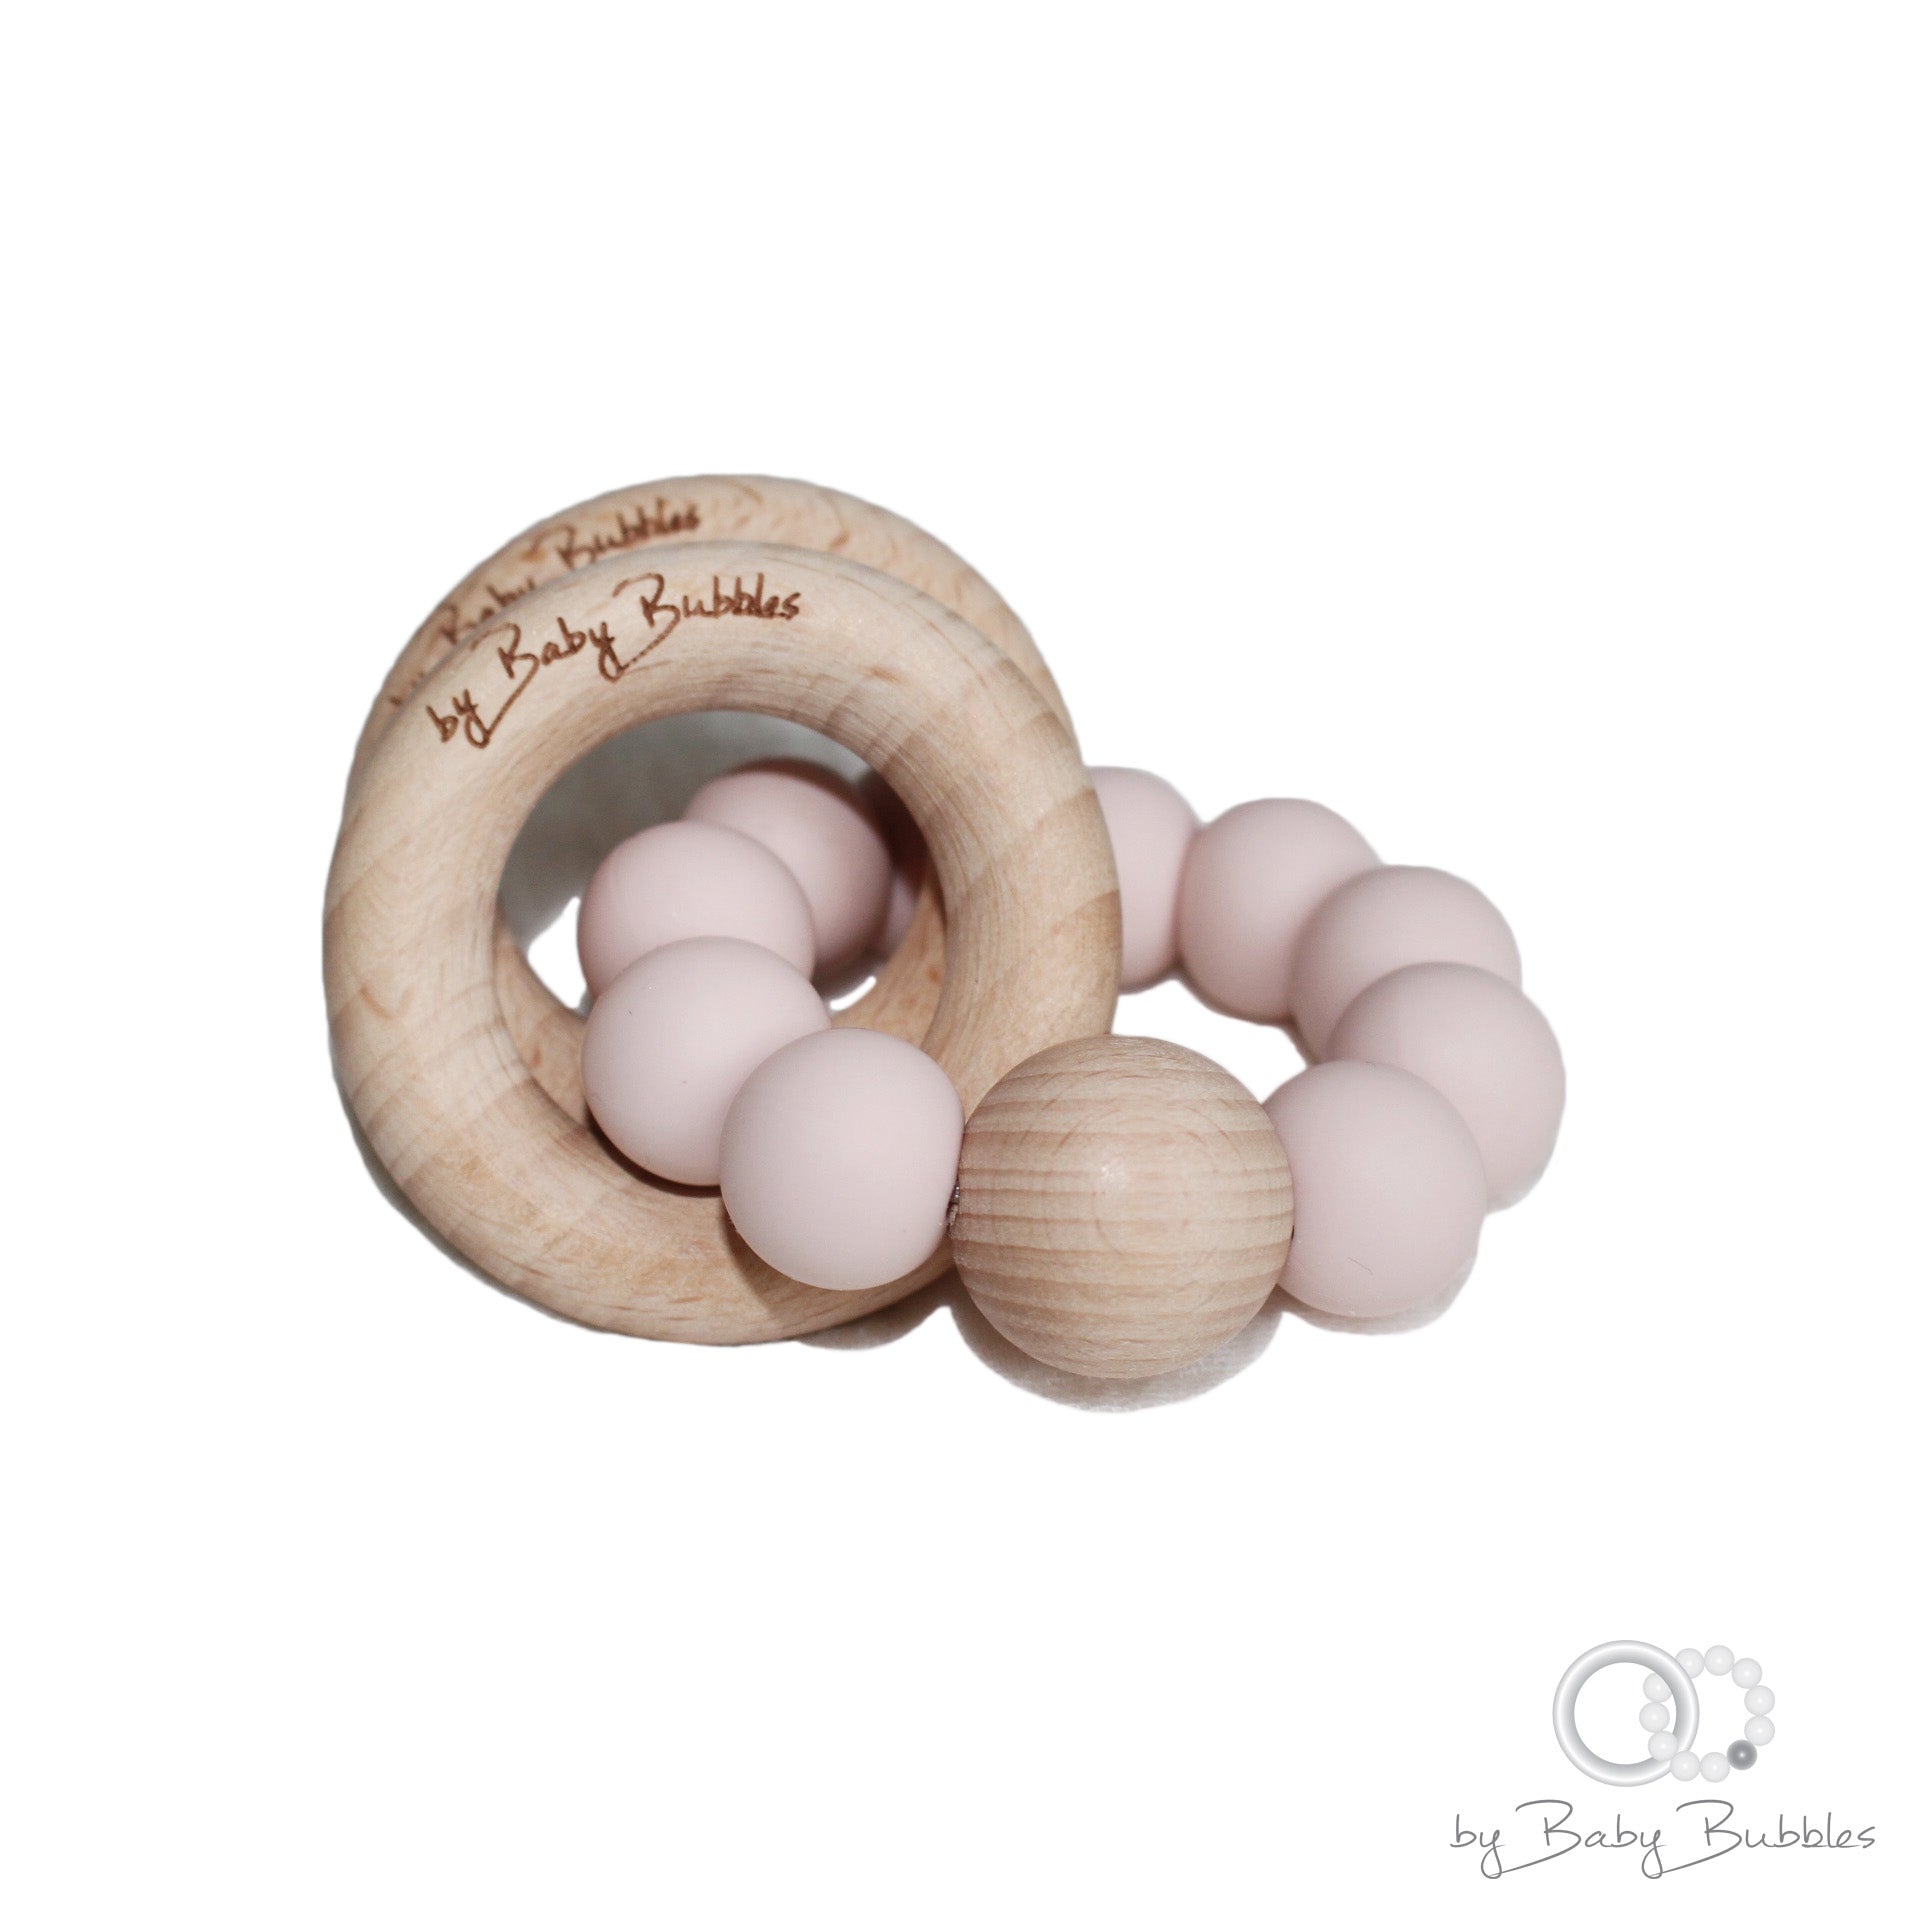 Light pink silicone and hardwood baby rattle